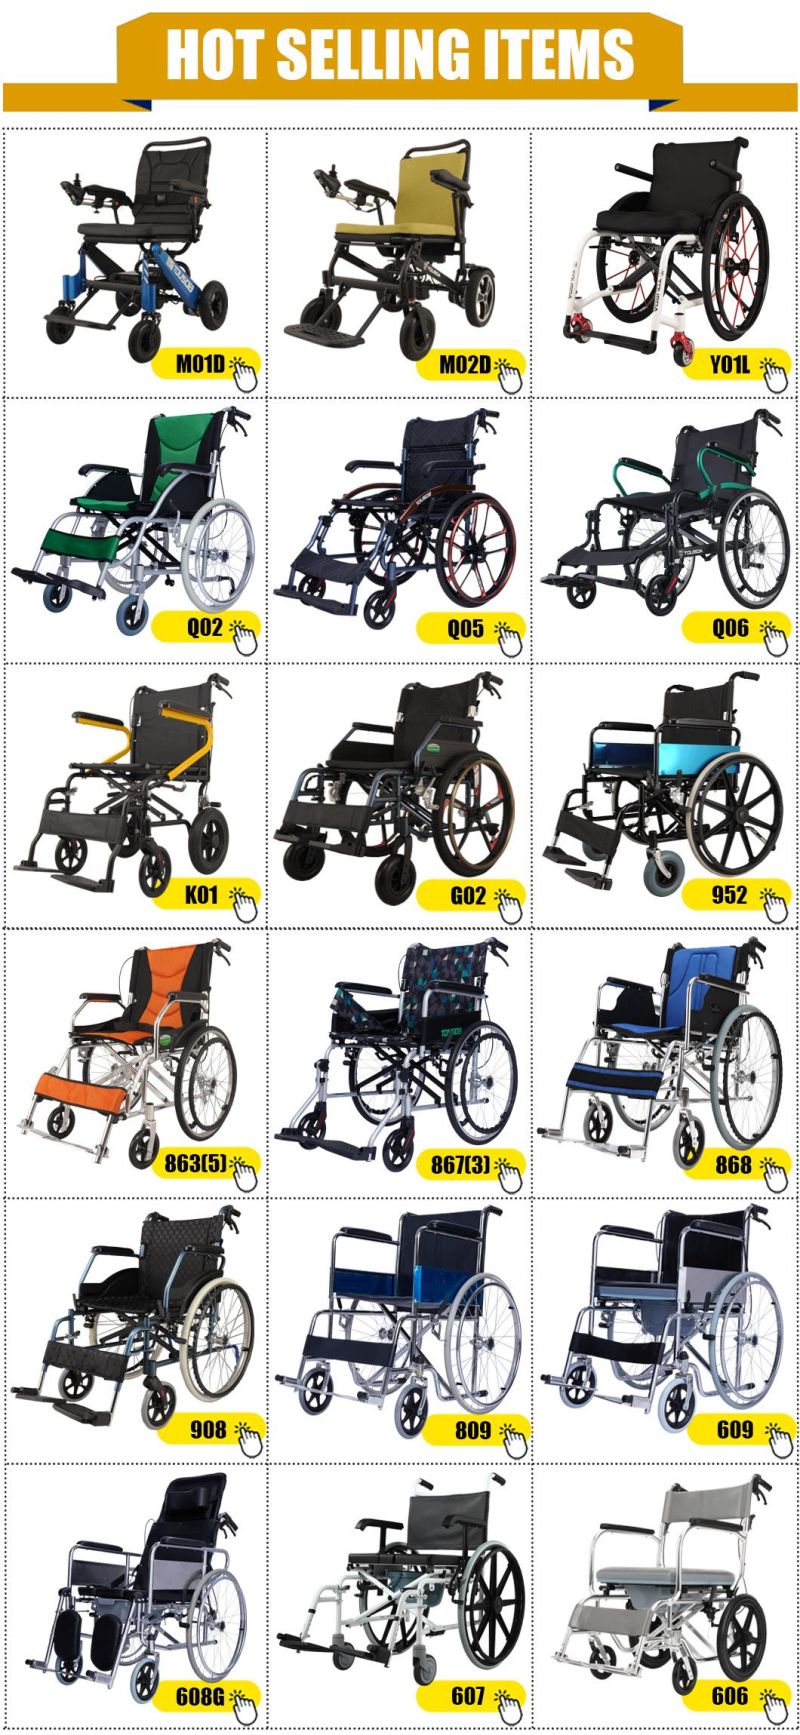 Foldable Aluminum Frame Stair Climbing Disabled Motorized Wheelchair for Disabled People